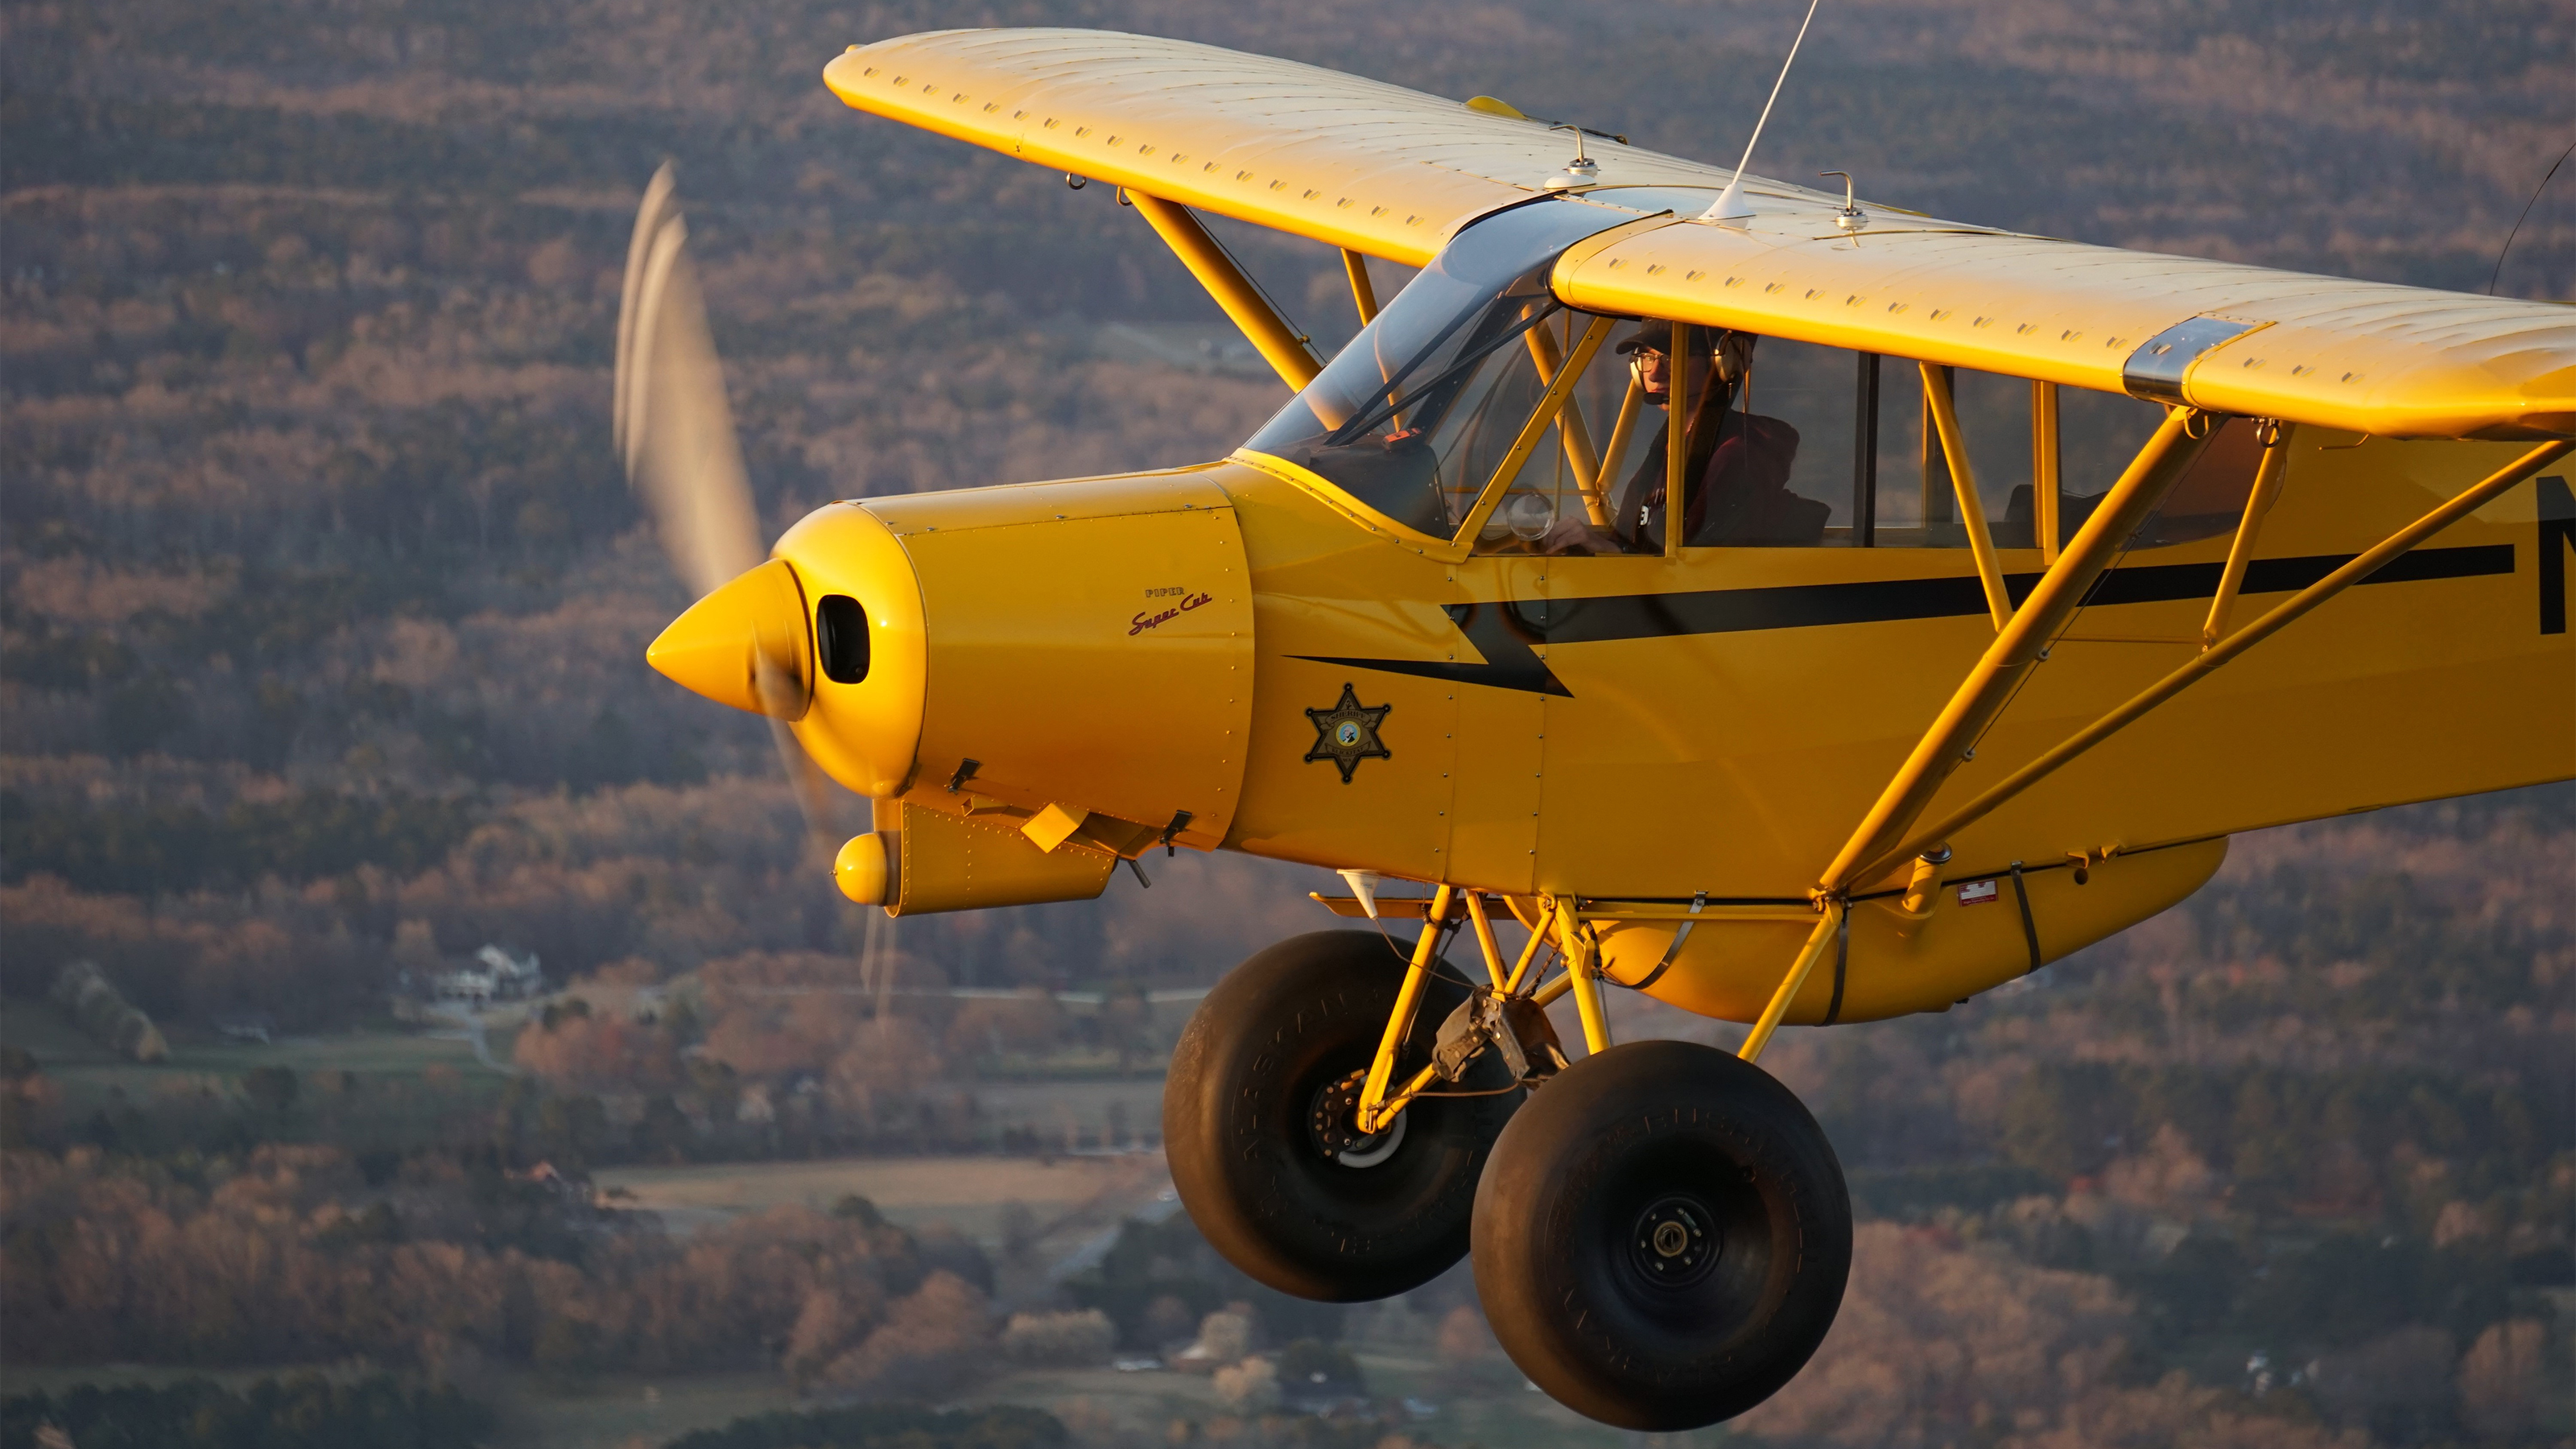 Adam Sarsfield aloft in his Super Cub solo for the very first time. Photo by Cayla McLeod. 